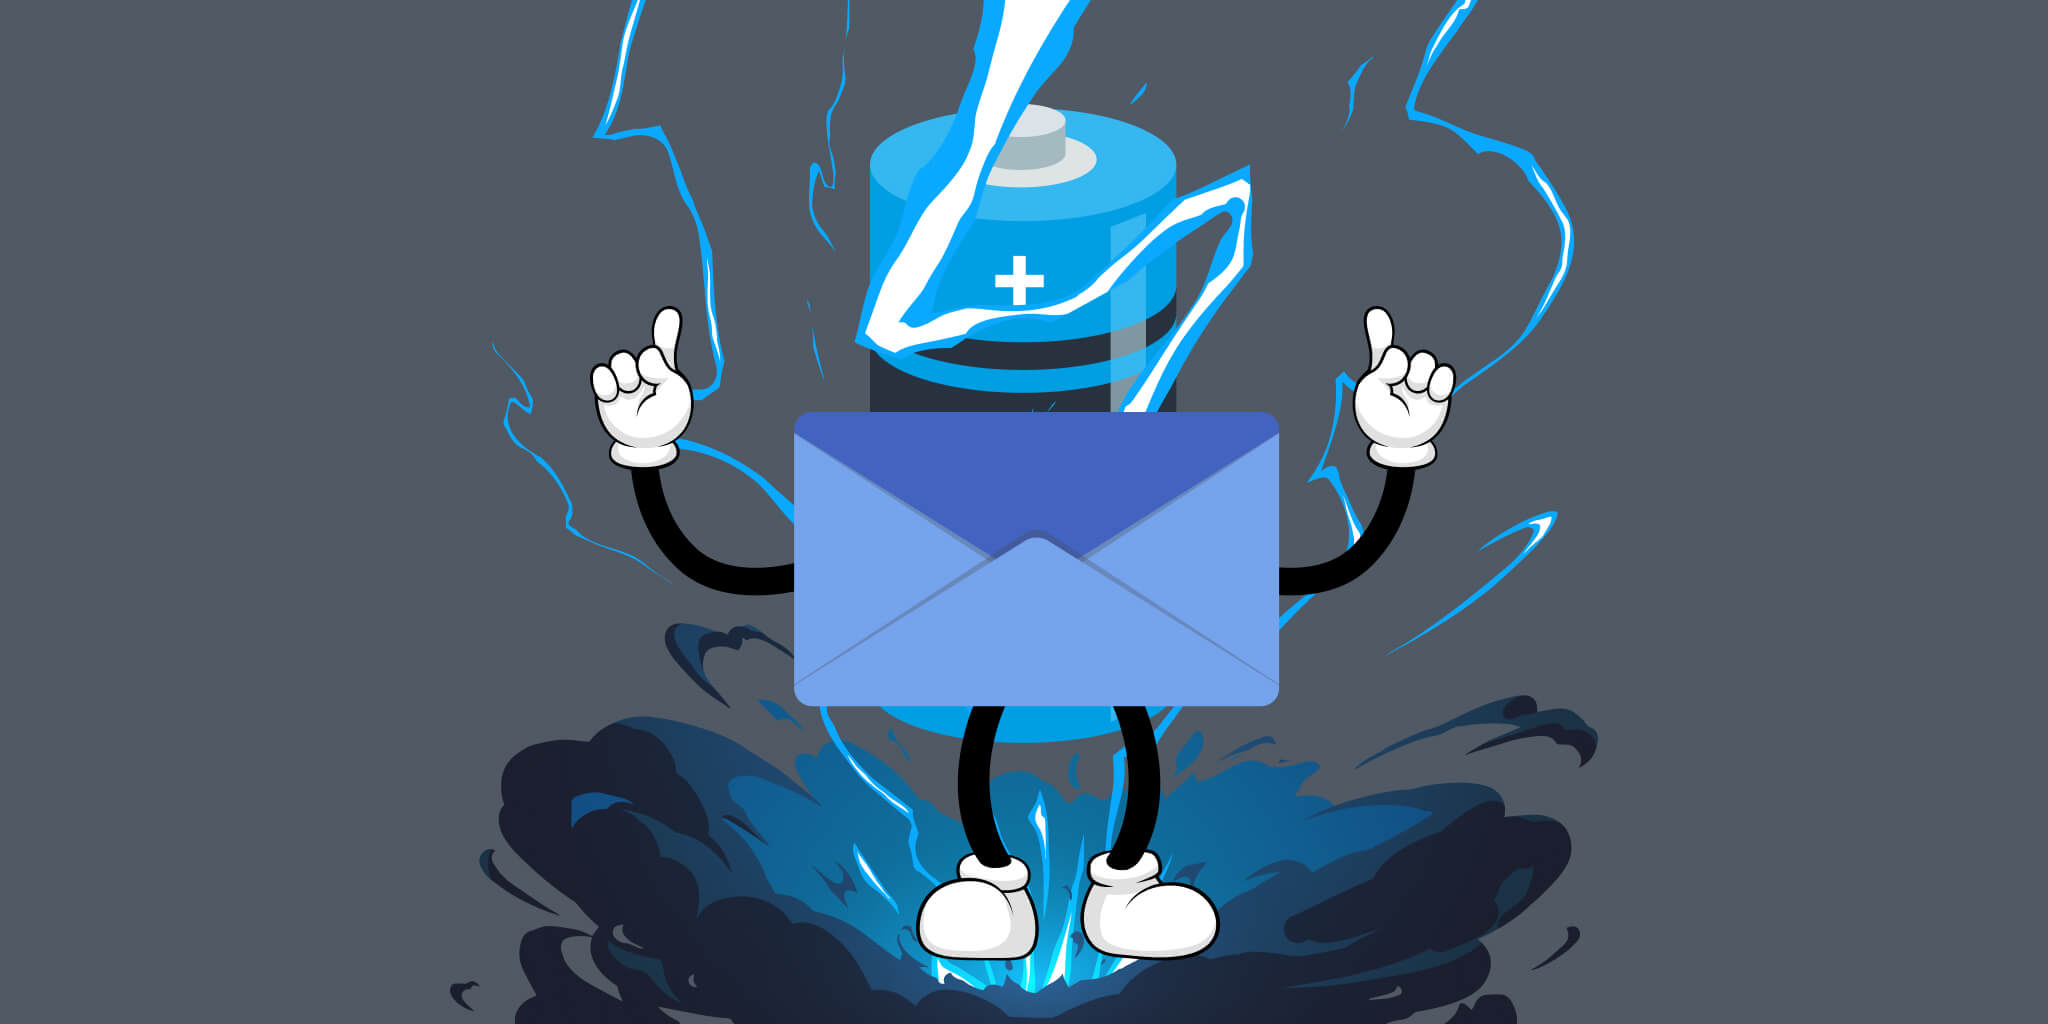 An email envelope character flexing and glowing with power/electricity with a battery behind it